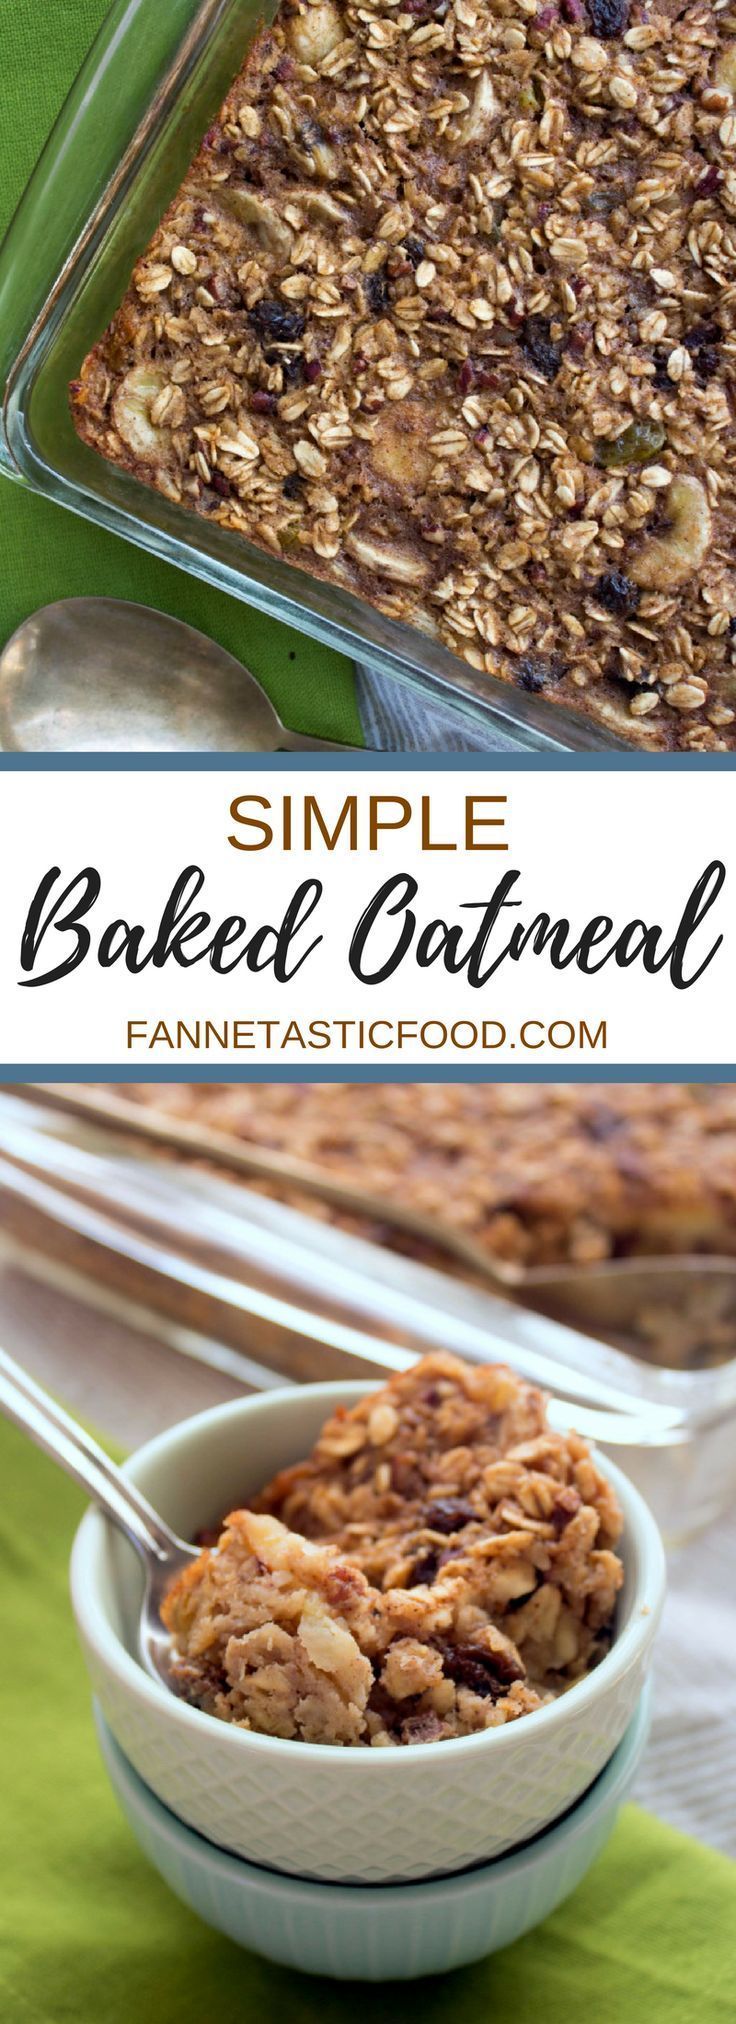 Simple Baked Oatmeal Recipe | Easy and Healthy -   16 healthy recipes Simple brunch food ideas